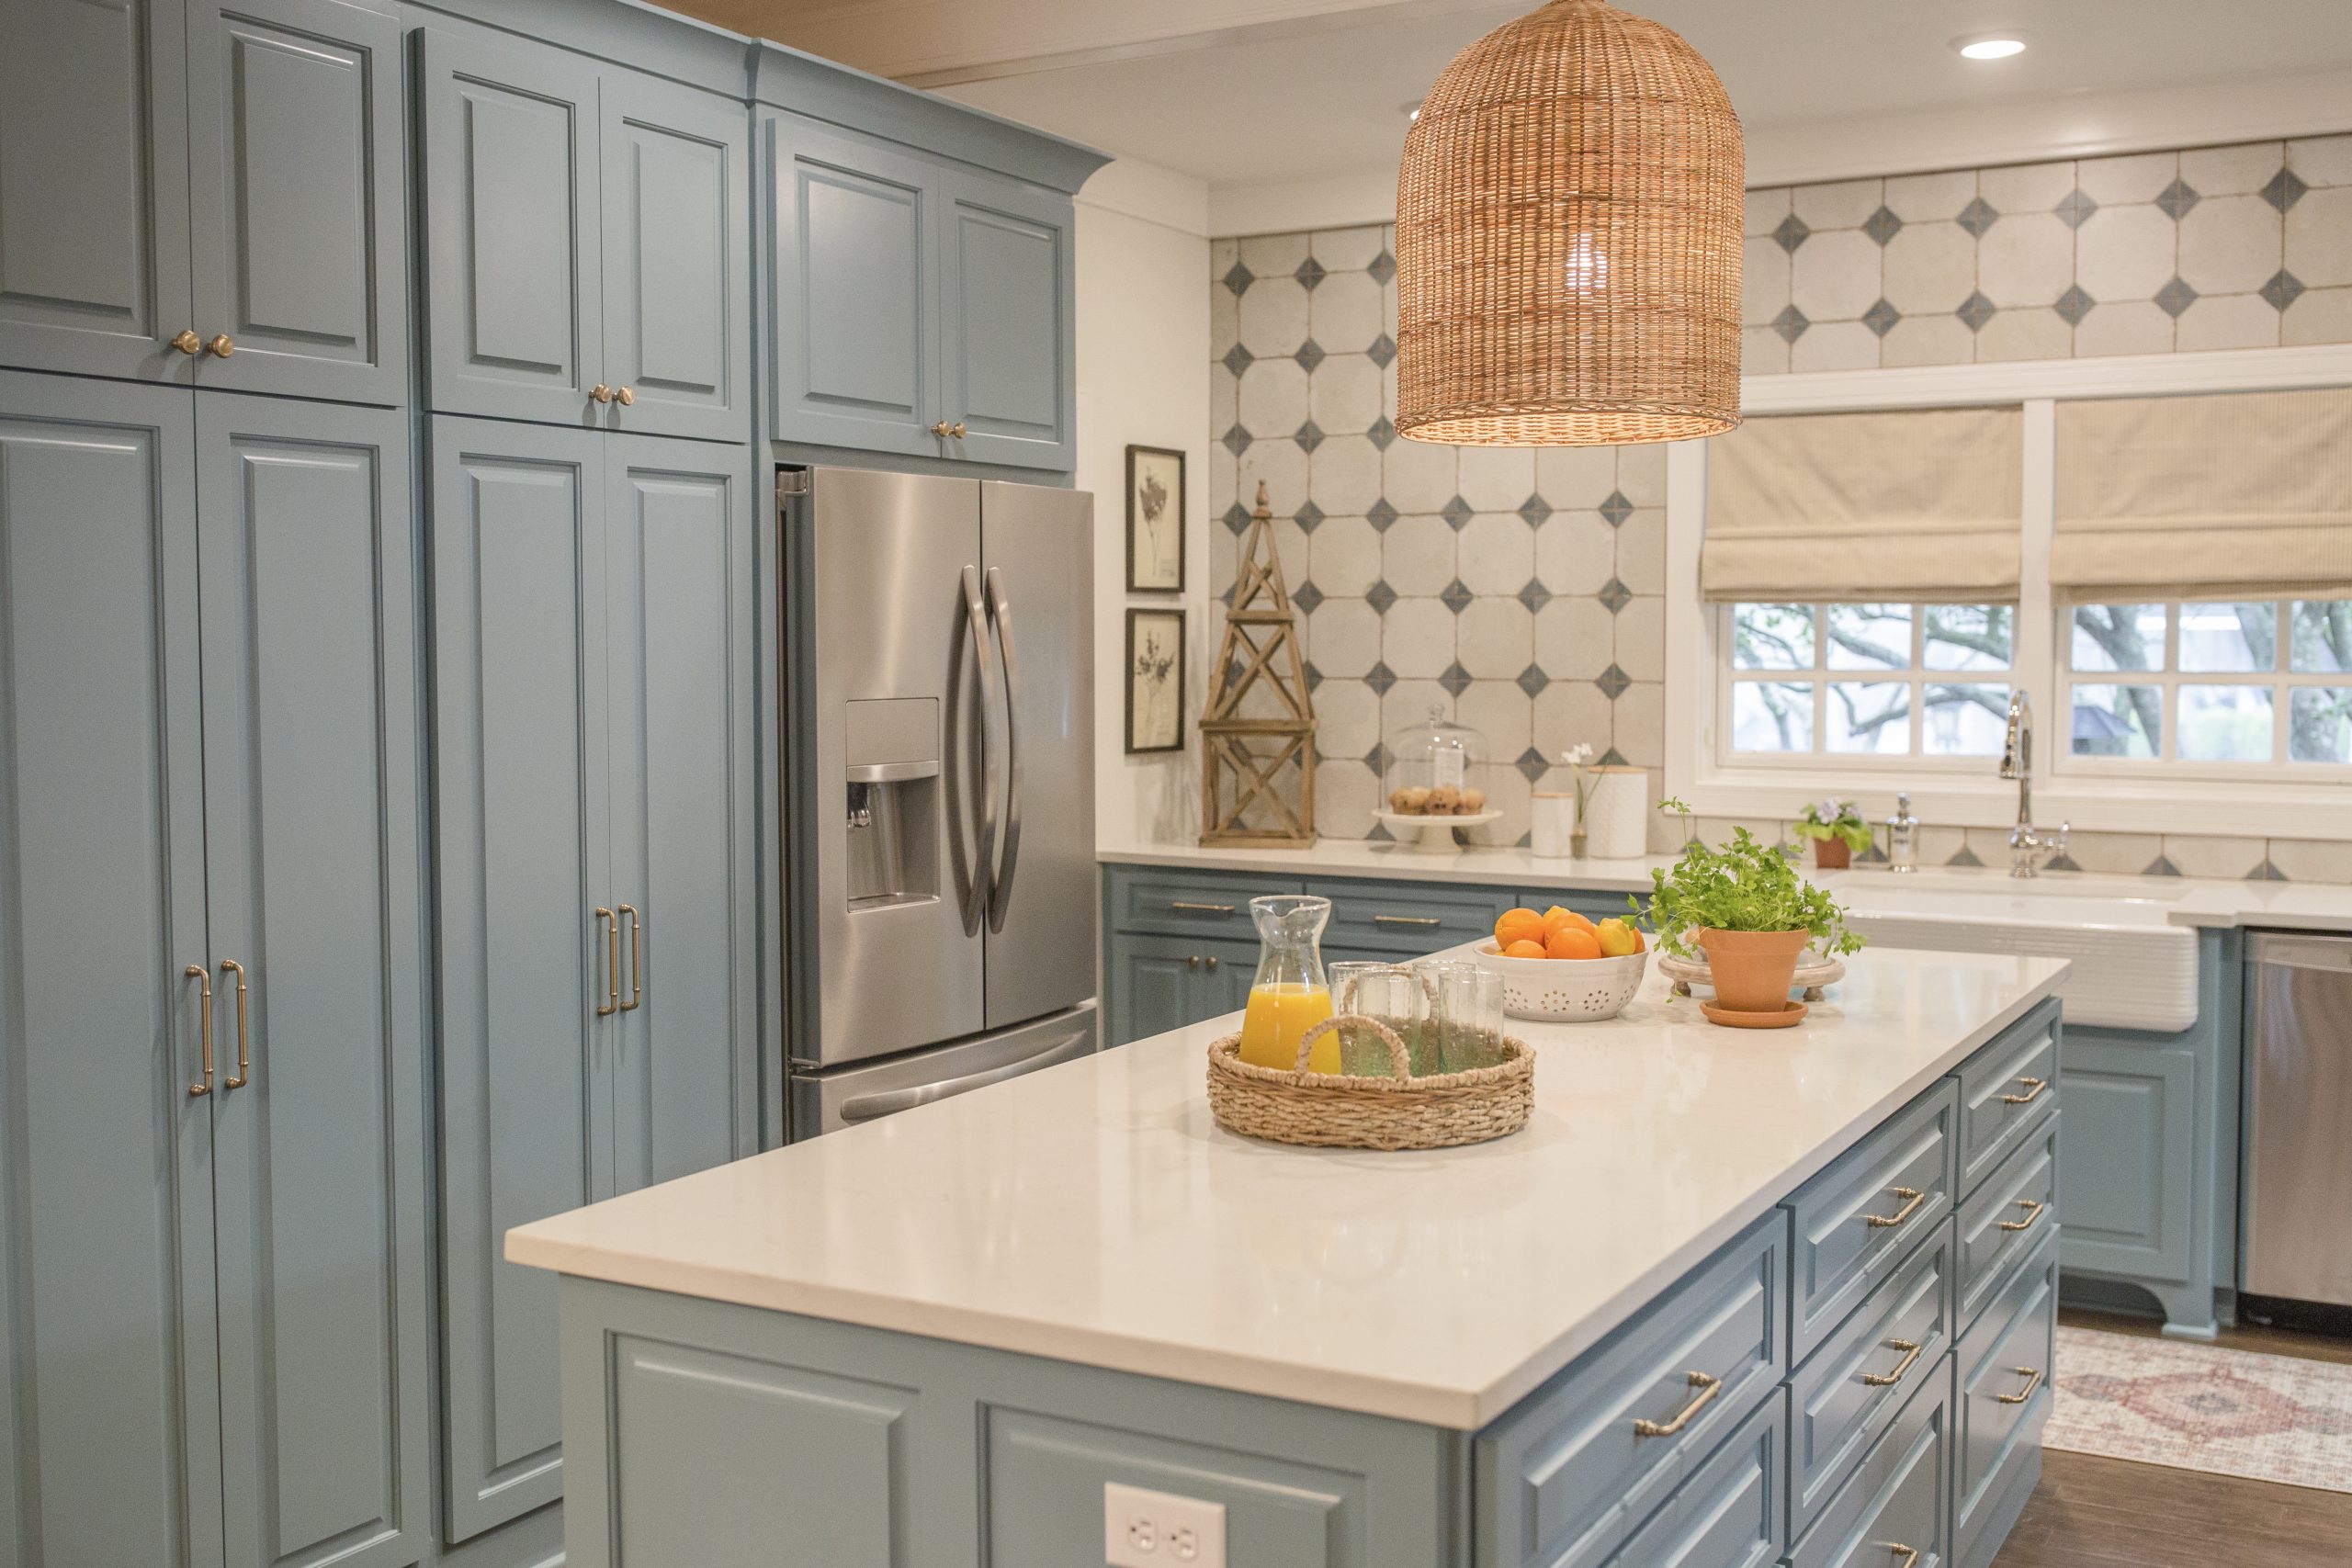 A kitchen with blue cabinetry and a unique blue diamond pattern backsplash